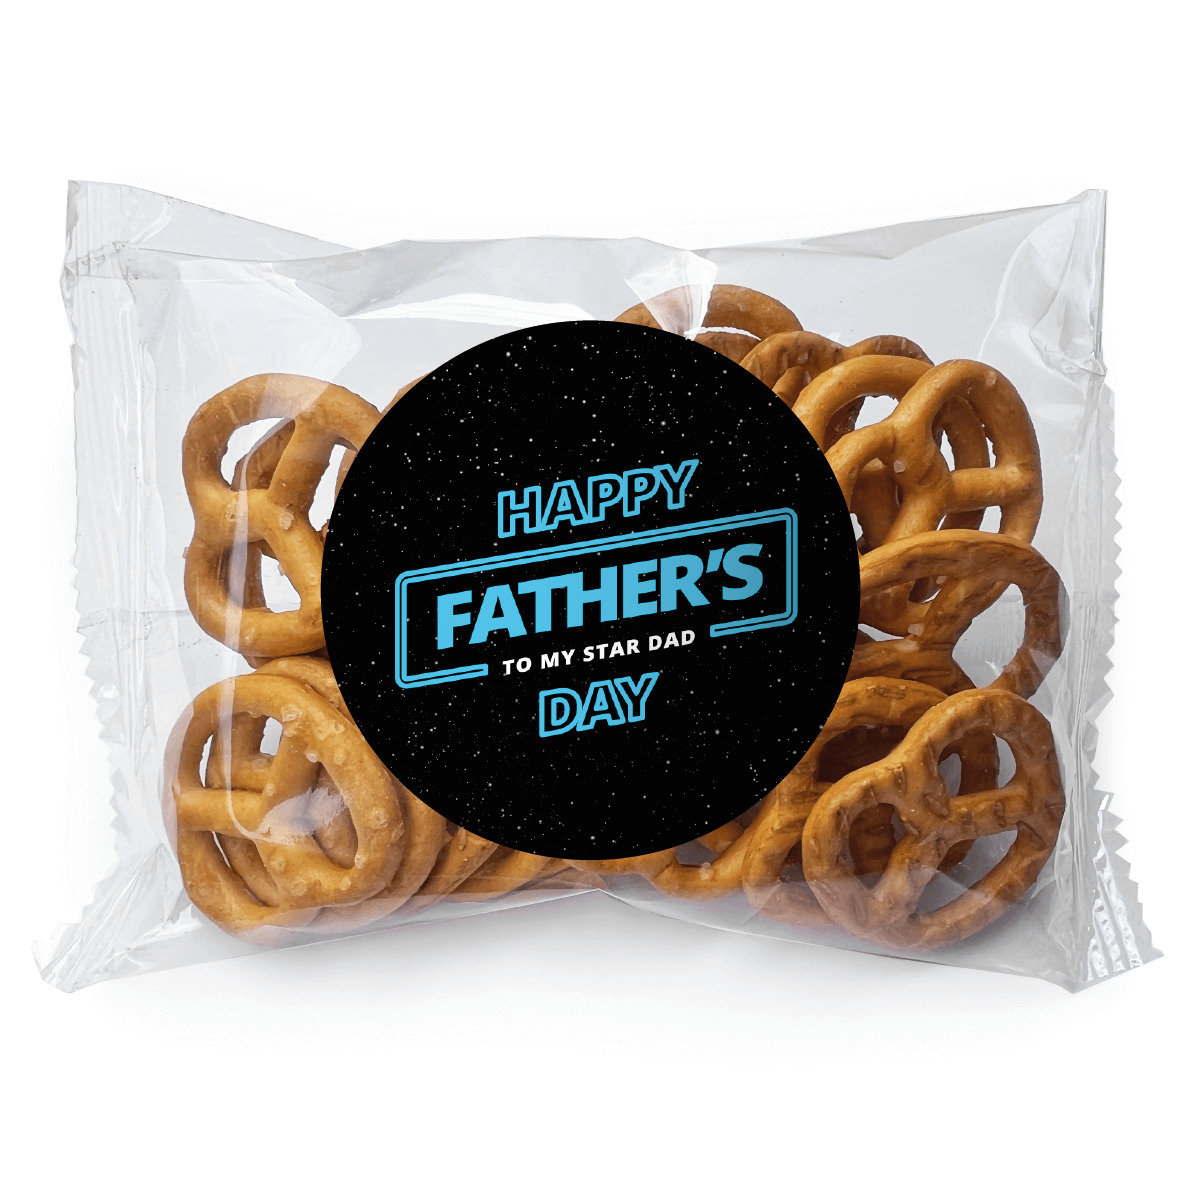 Shop for Customised Galaxy Father's Day Pretzels - Australia